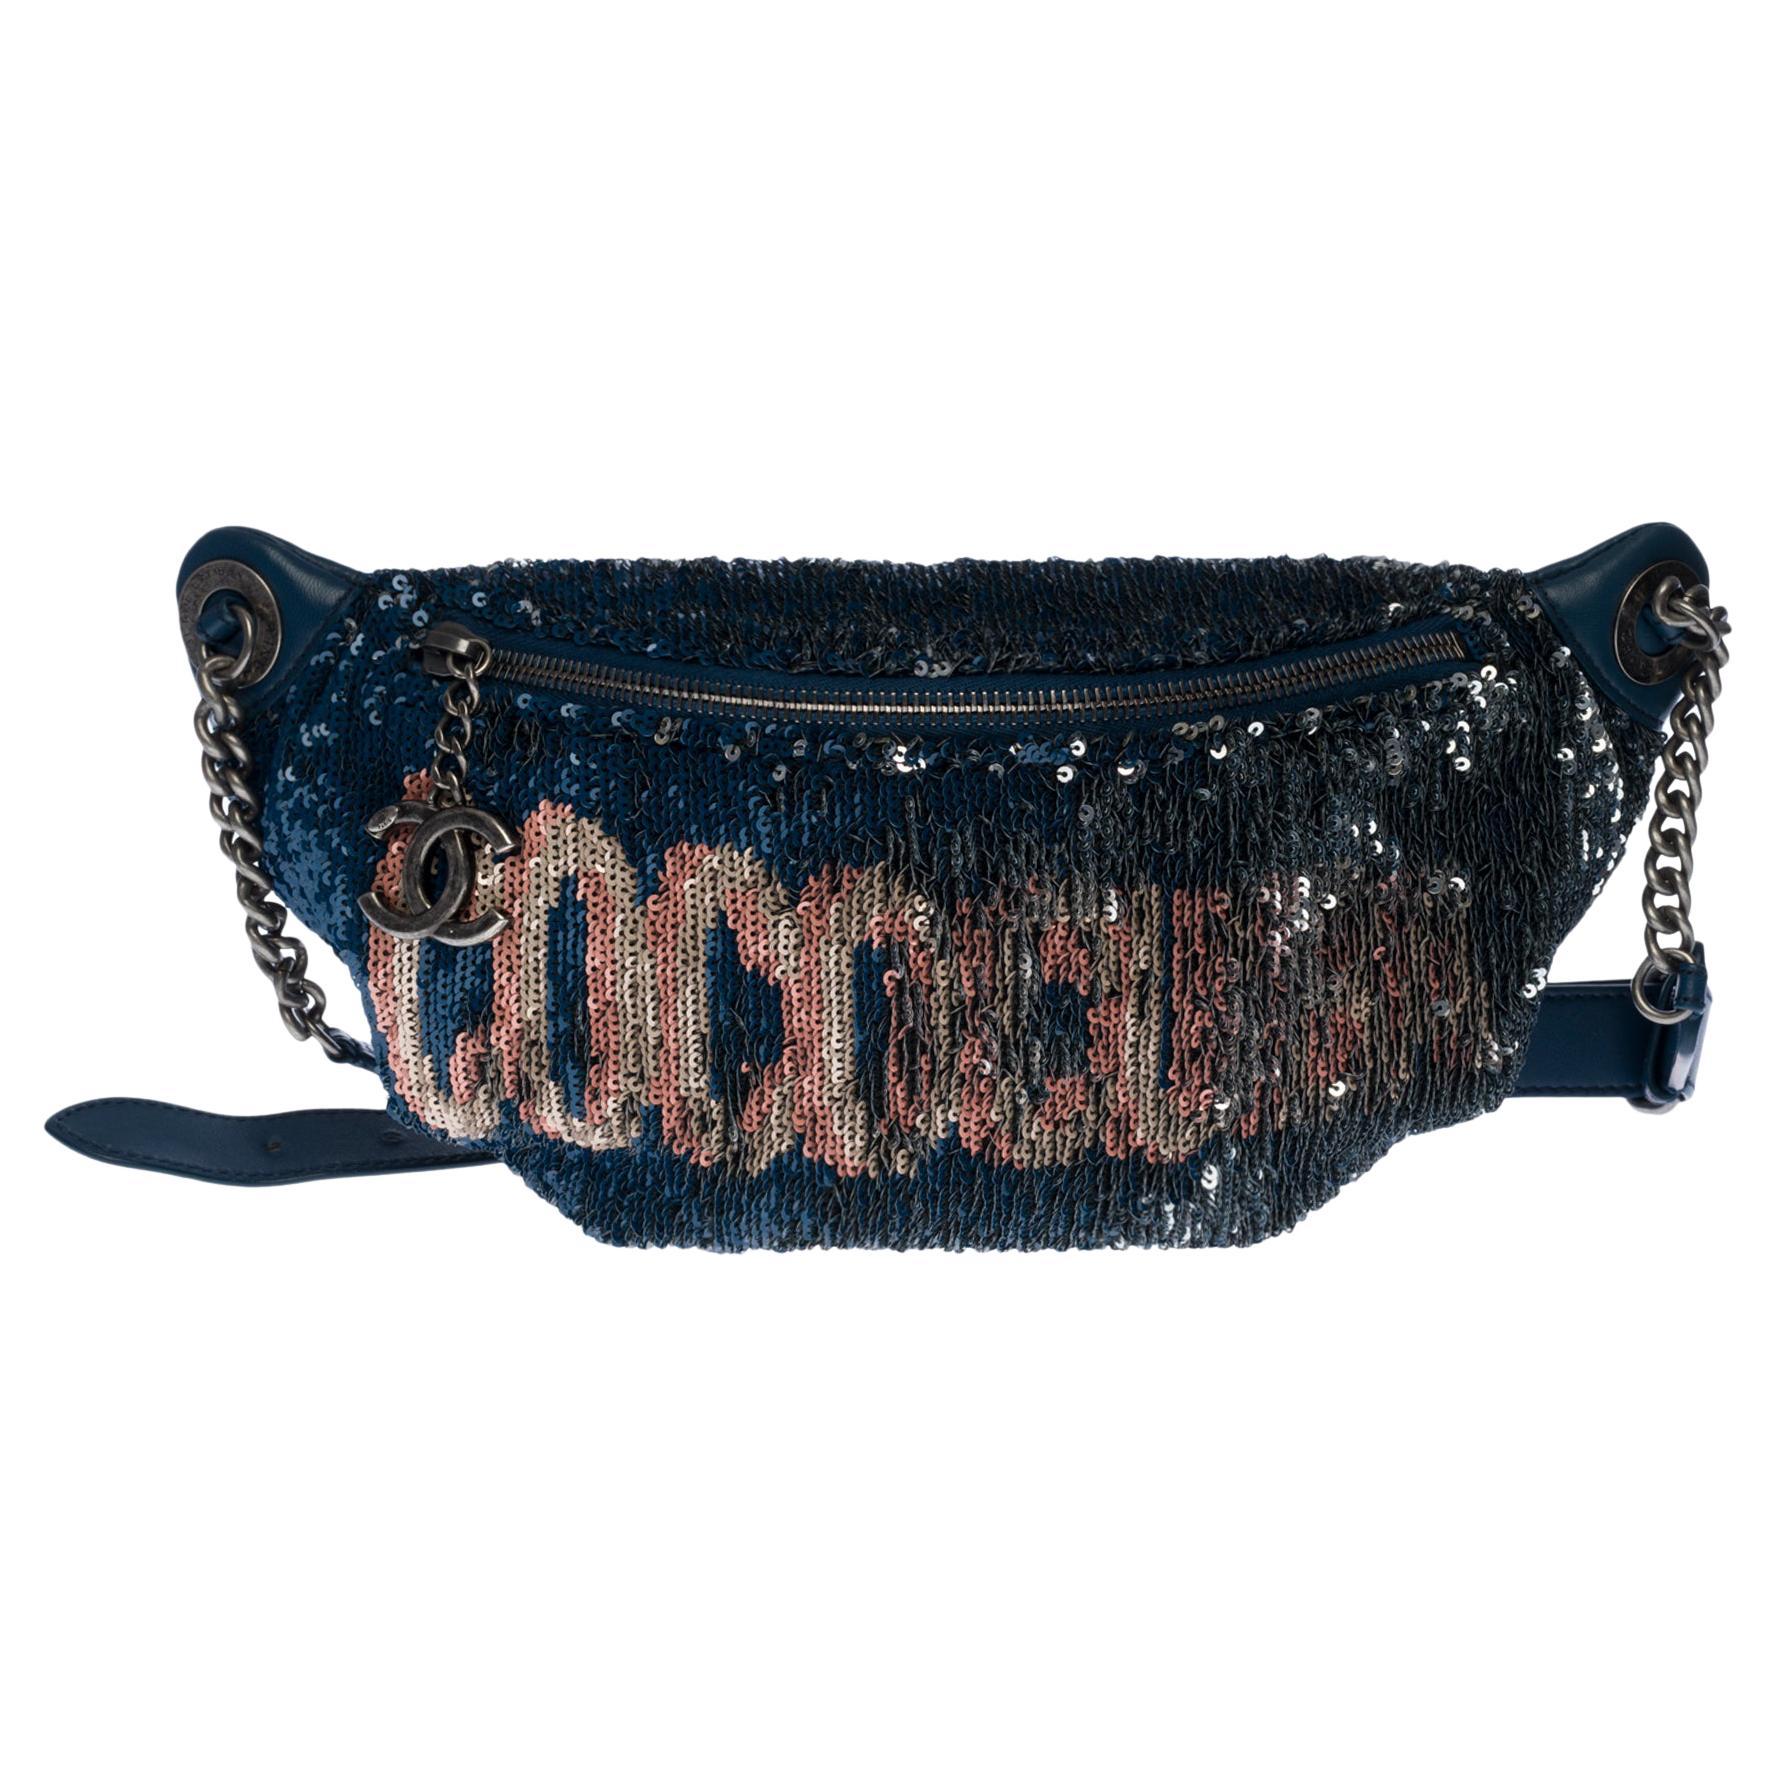 Limited Edition Chanel "CocoCuba" belt bag in blue sequins, silver hardware